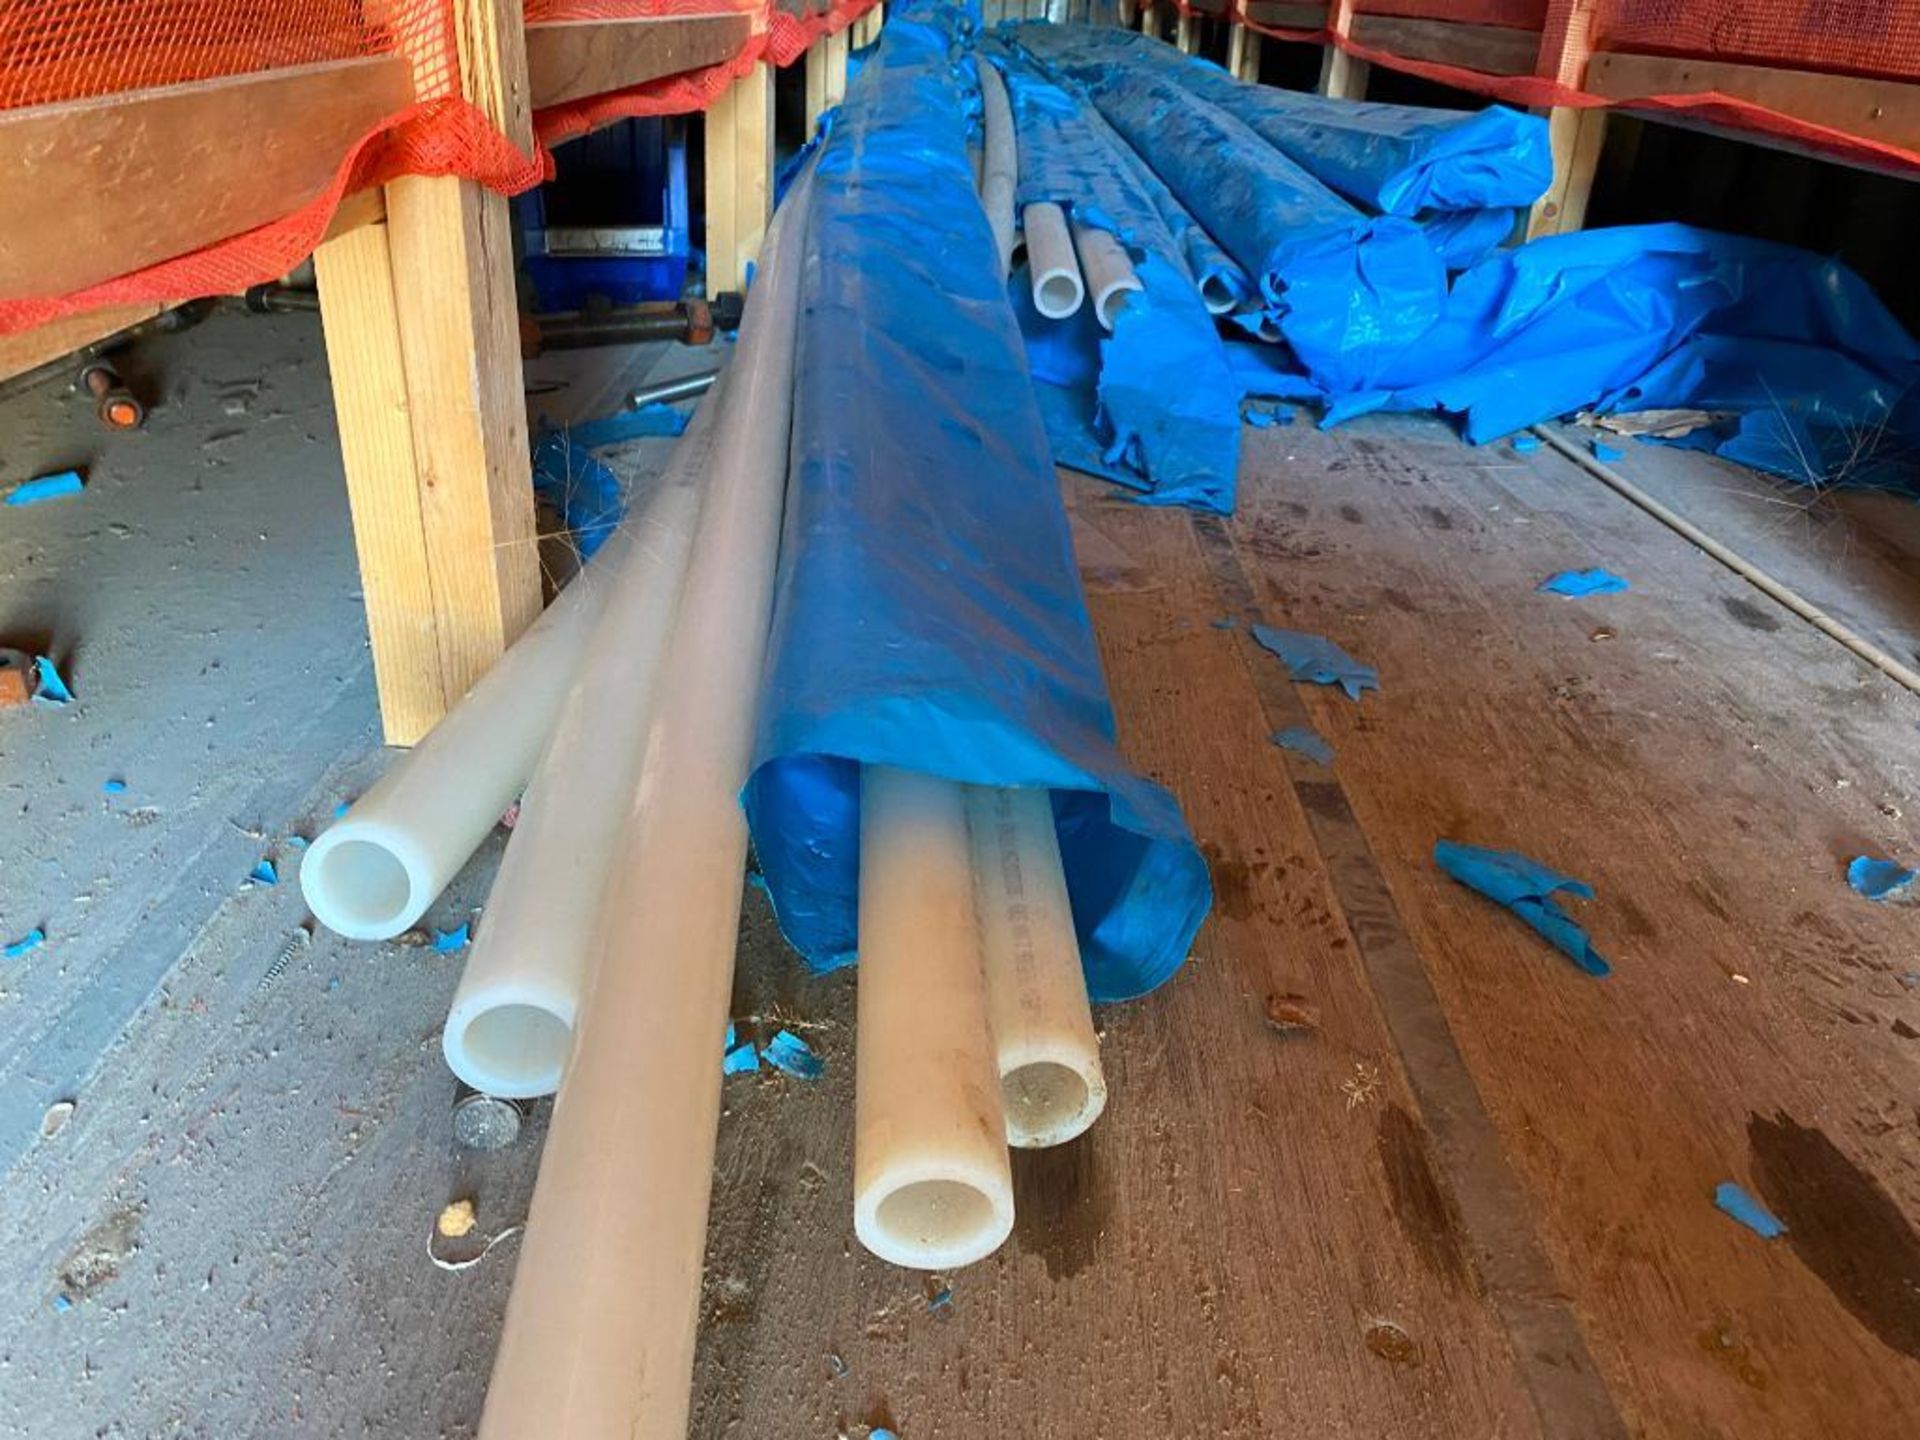 Conex, 40' x 8' x 8', w/ Content of Tarps, Pvc Pipe, (New) Hose Reels, Fasteners - Image 9 of 12